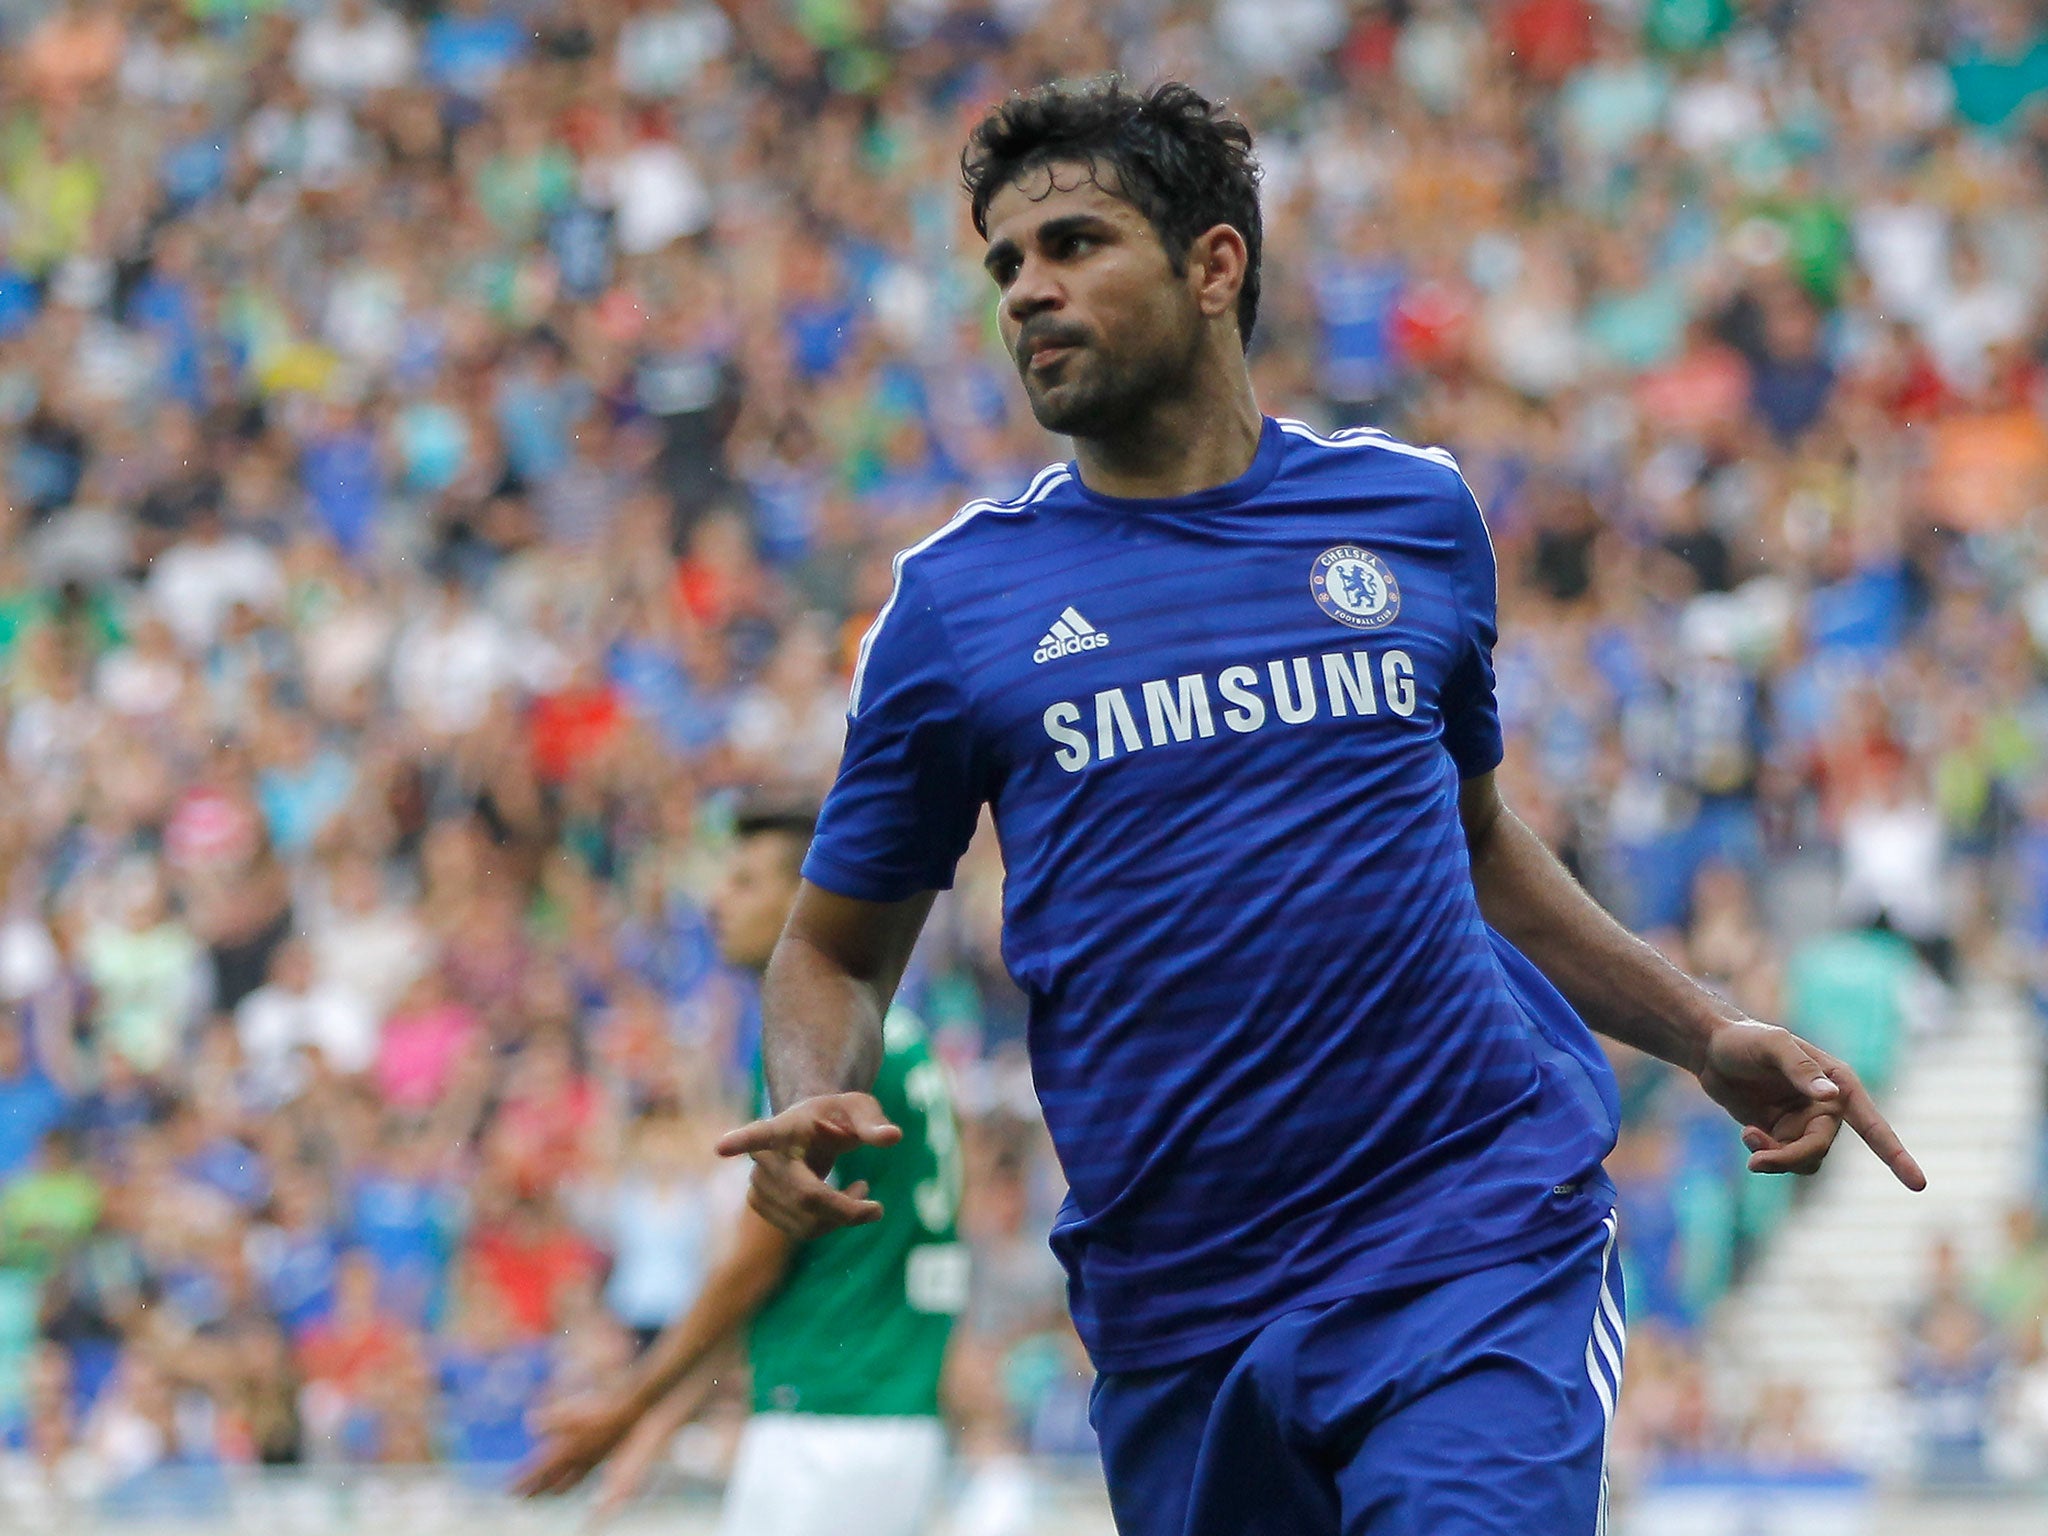 Costa has impressed for the Blues in pre-season